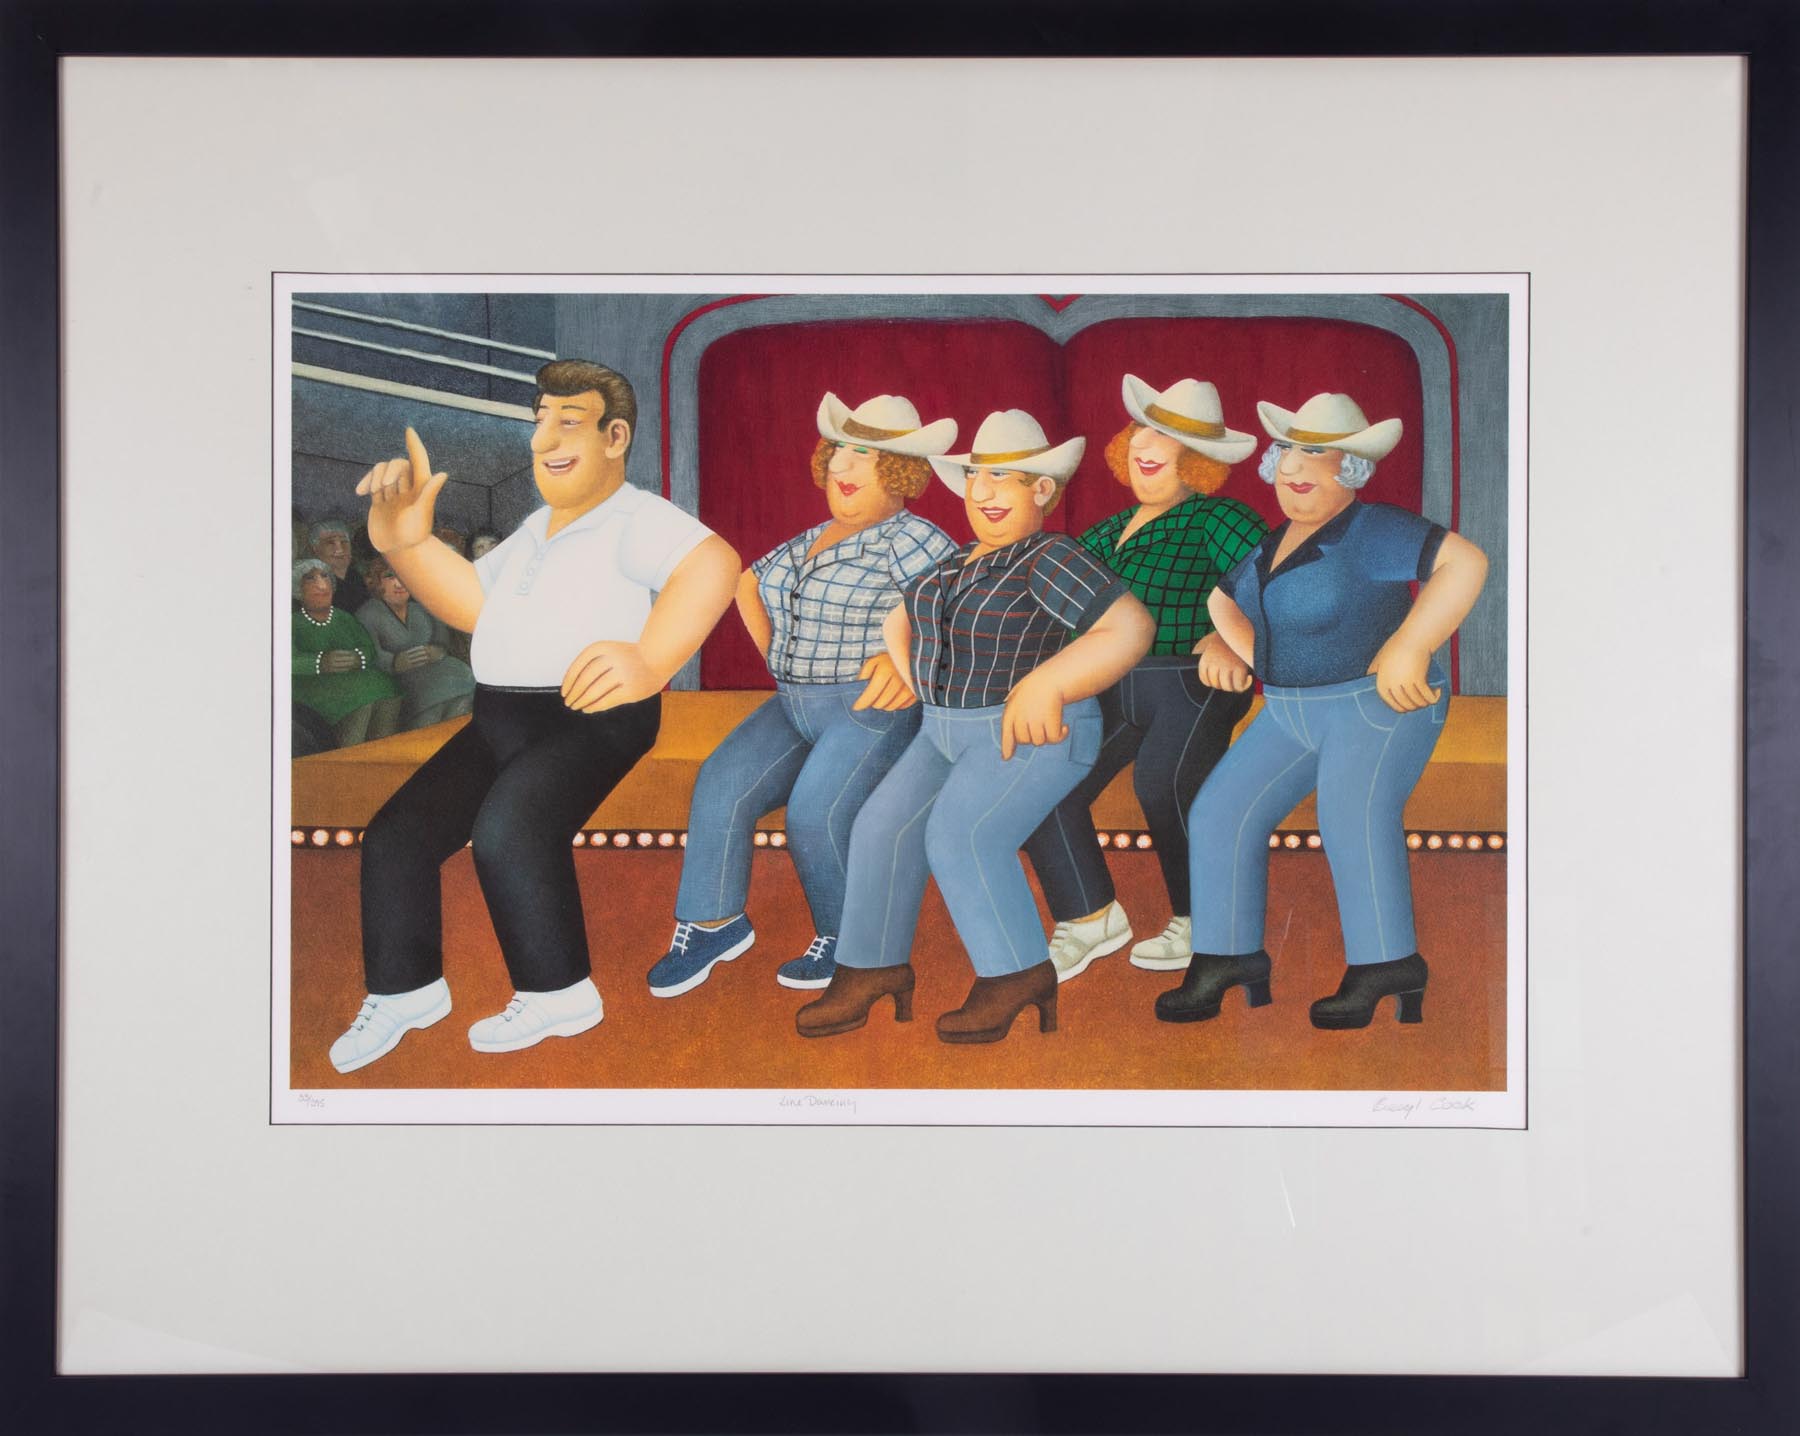 Beryl Cook (1926-2008) 'Line Dancing' signed limited edition print 33/395, overall size 82cm x 103cm